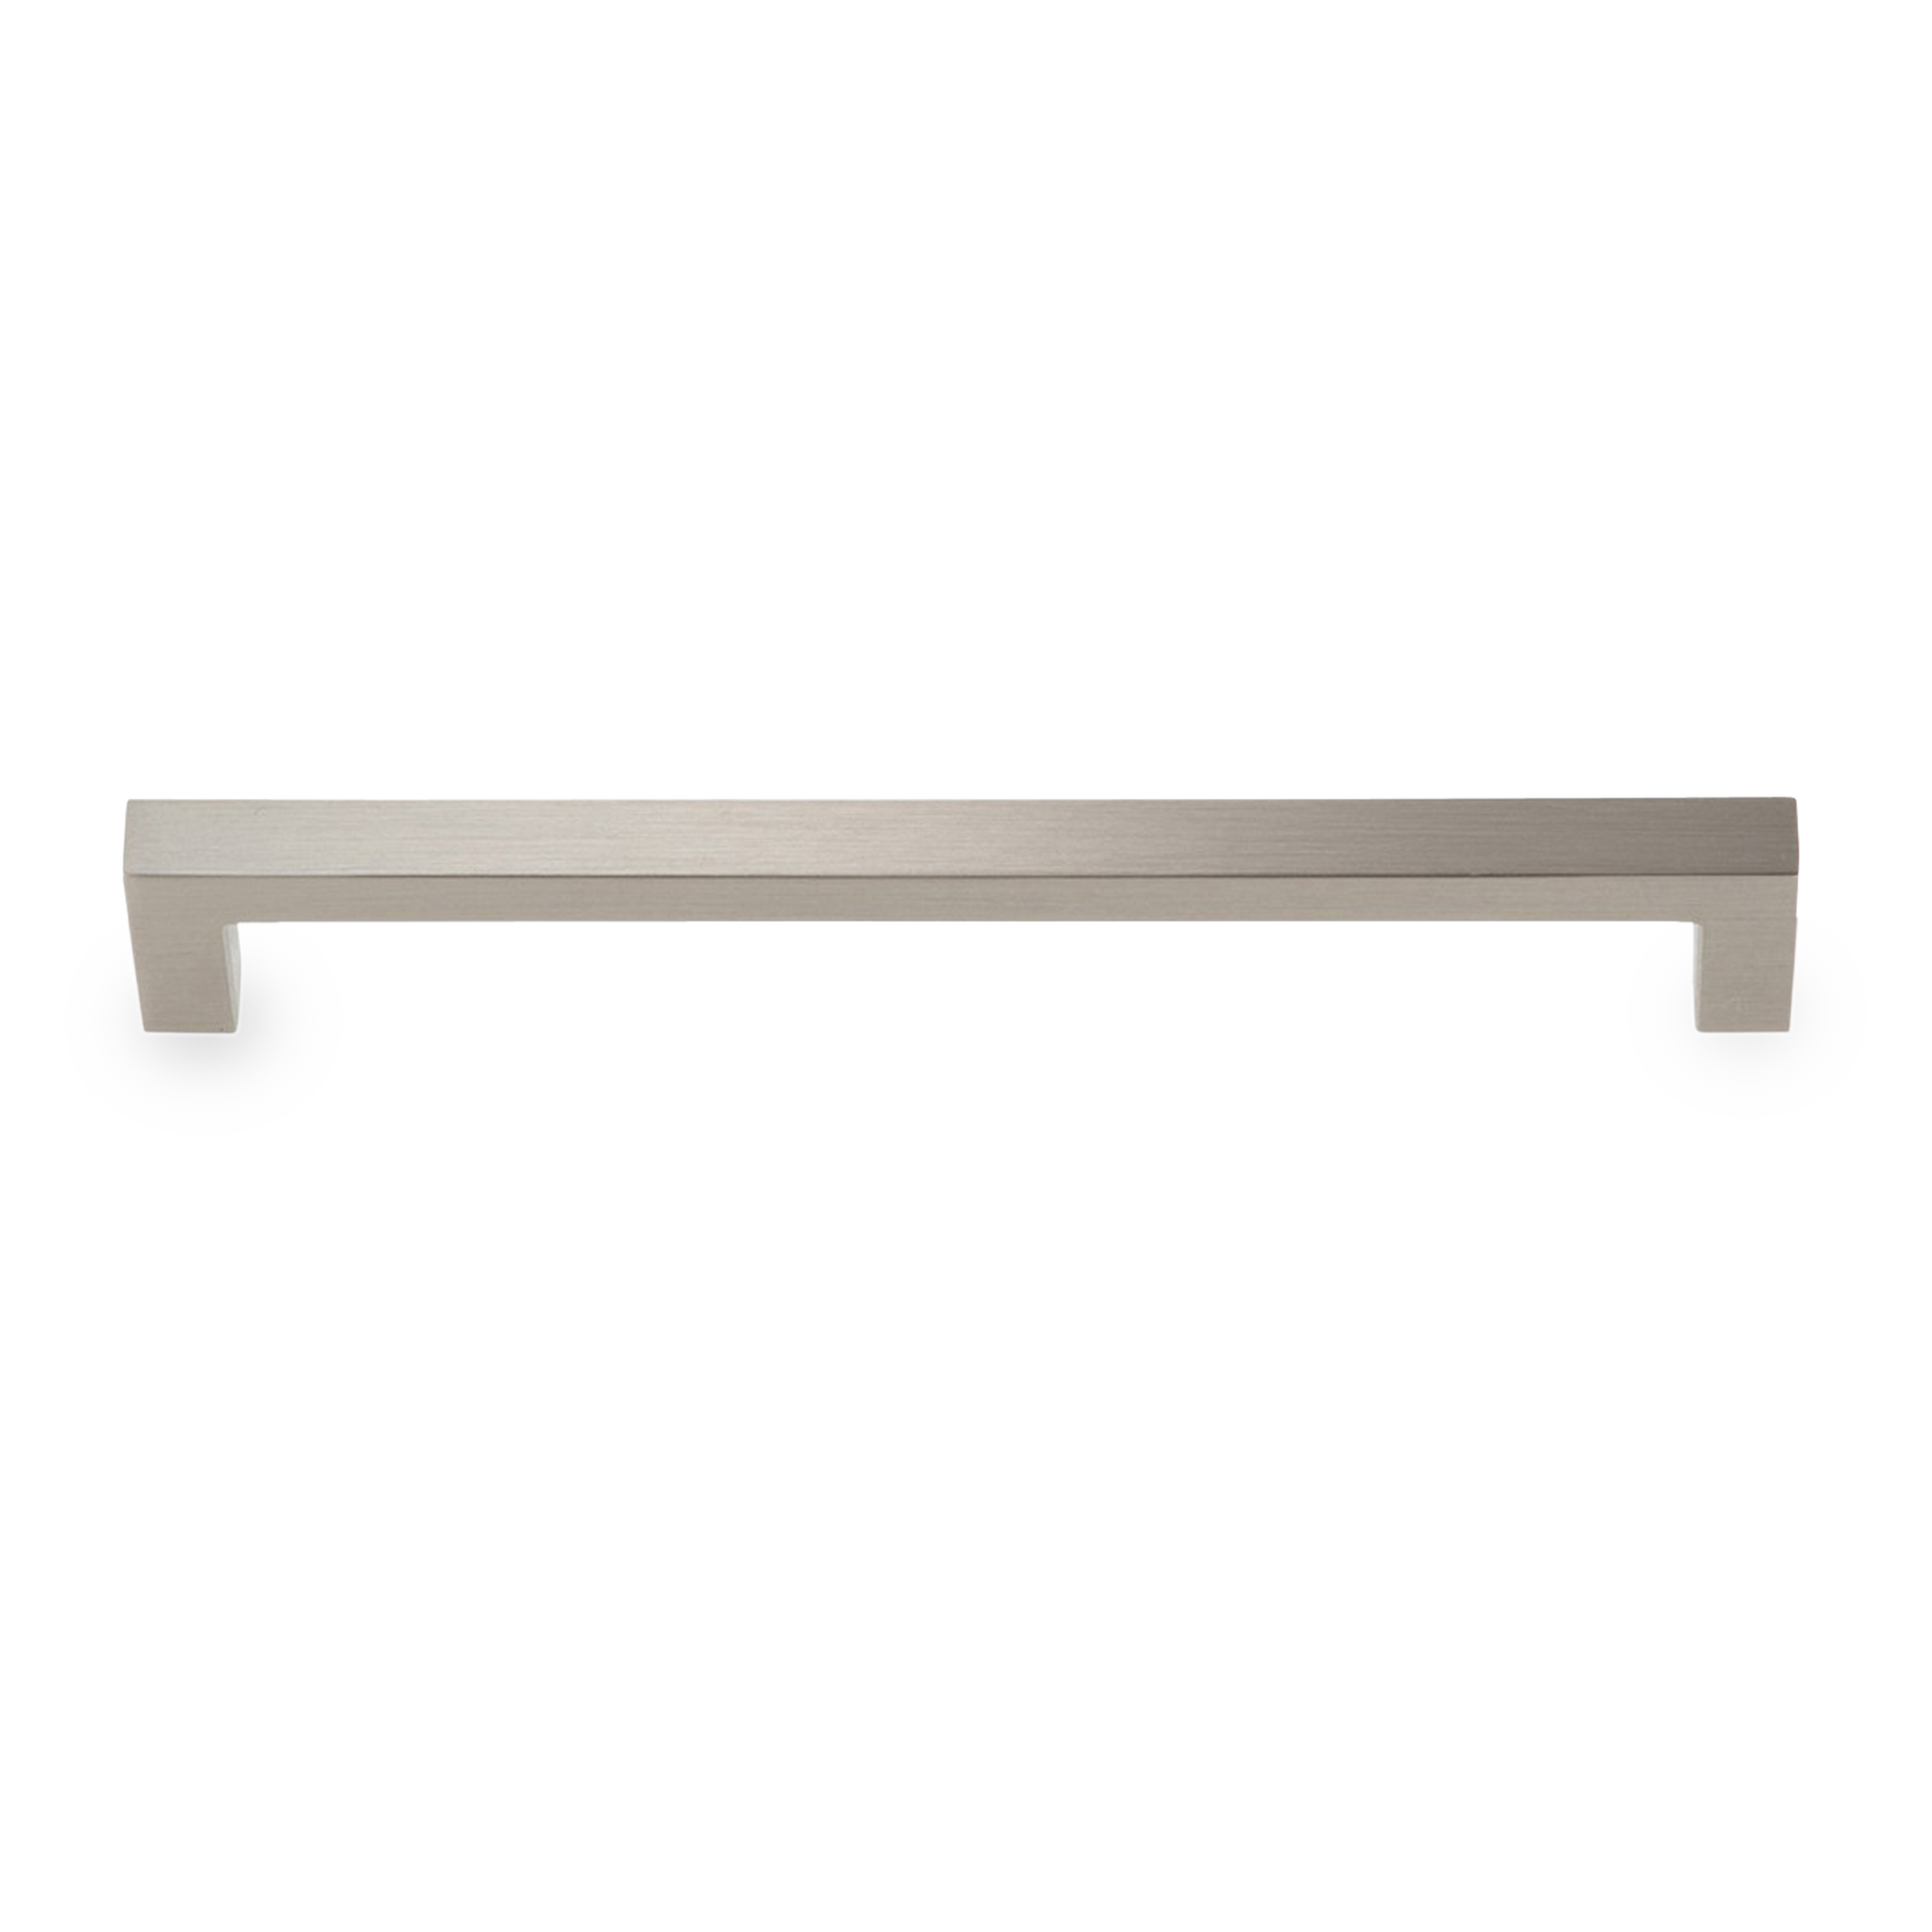 A sleek rectangular pull with a brushed nickel finish.